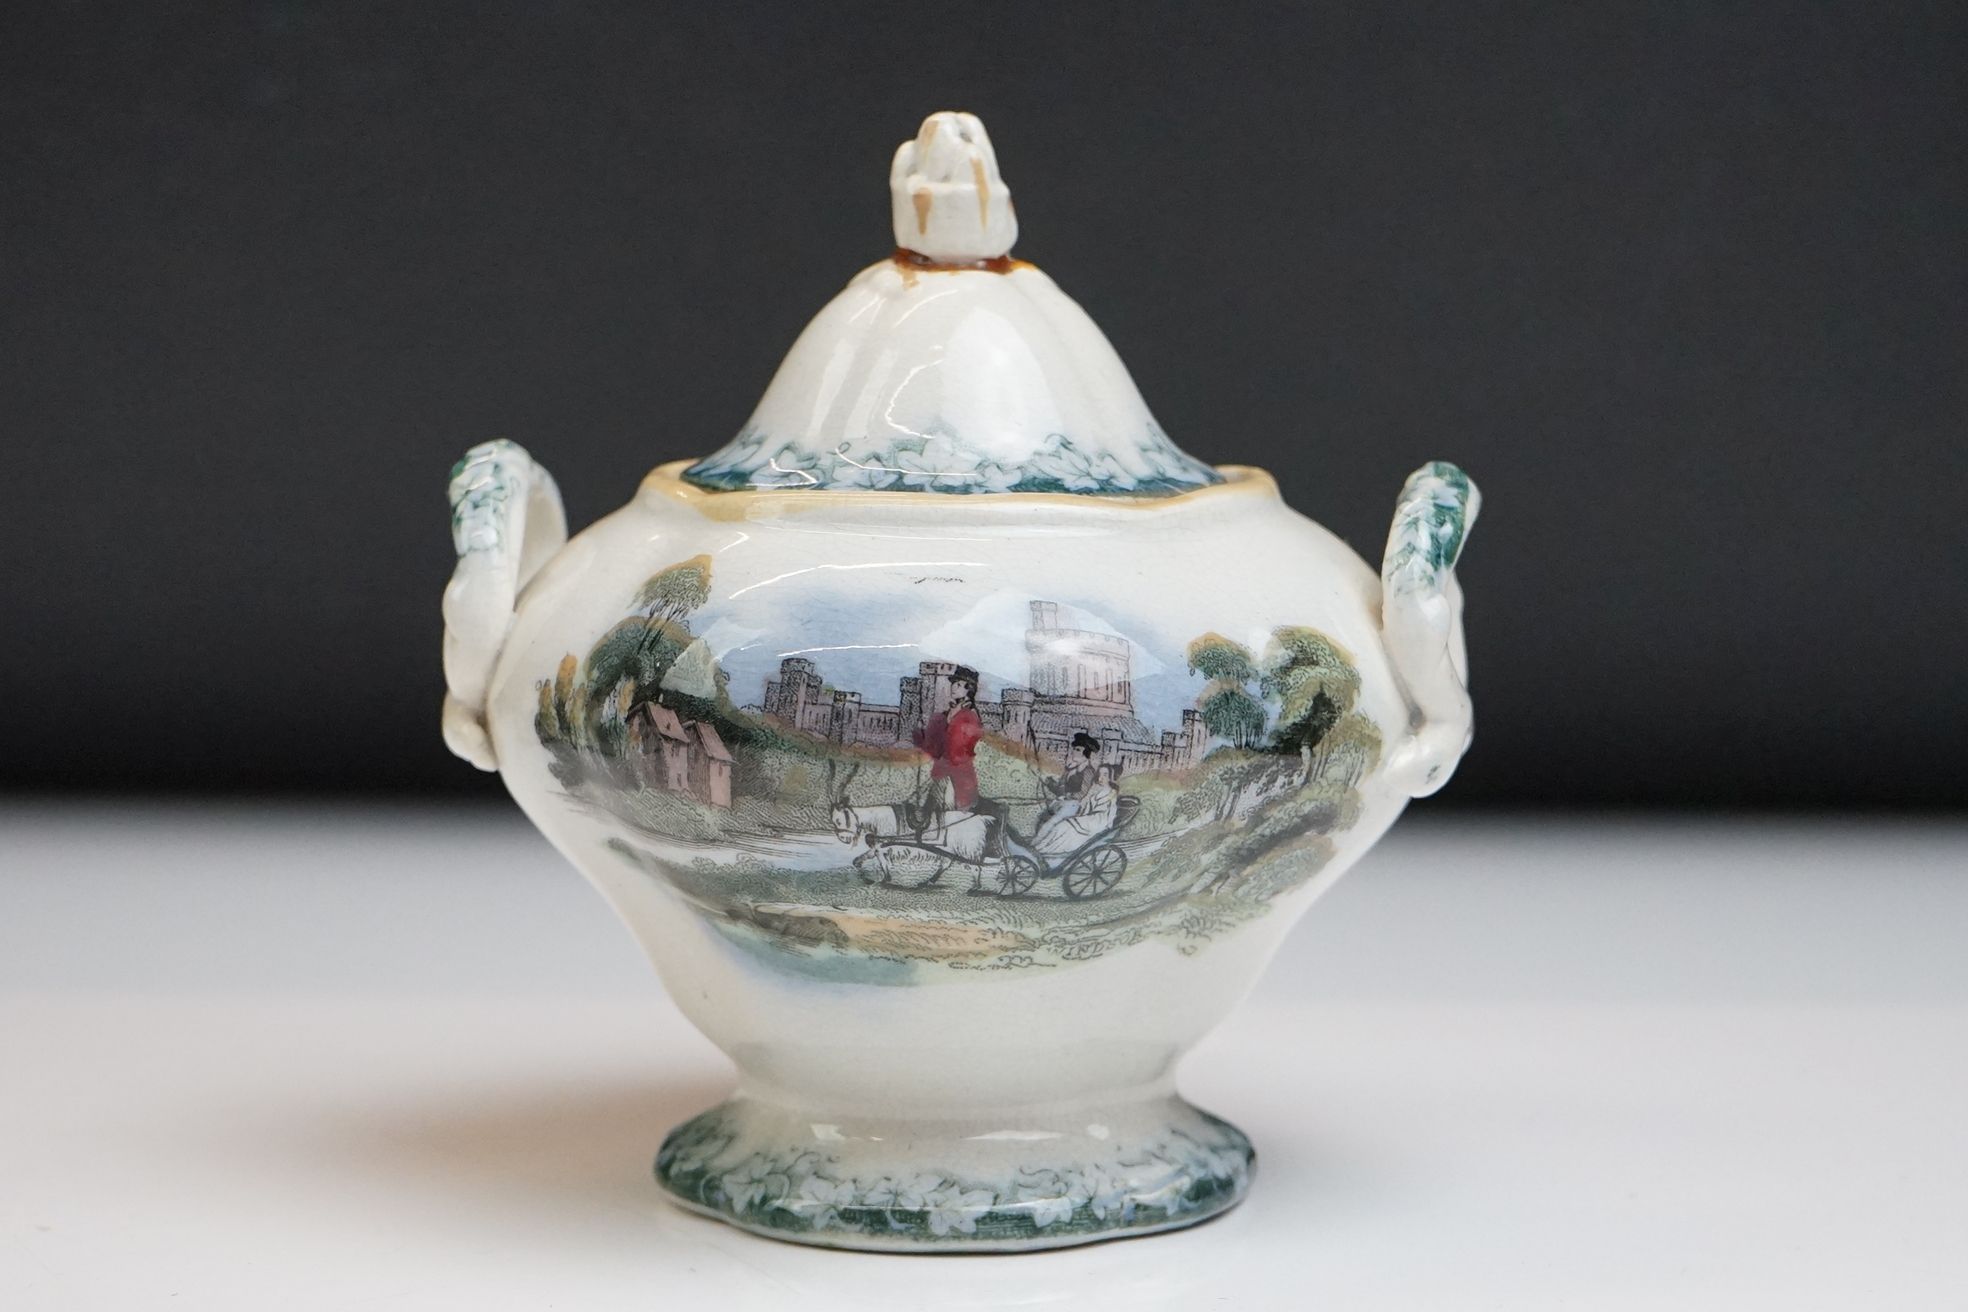 19th century Staffordshire Pottery Child's part Tea Set with transfer decoration of a goat pulling a - Image 6 of 10